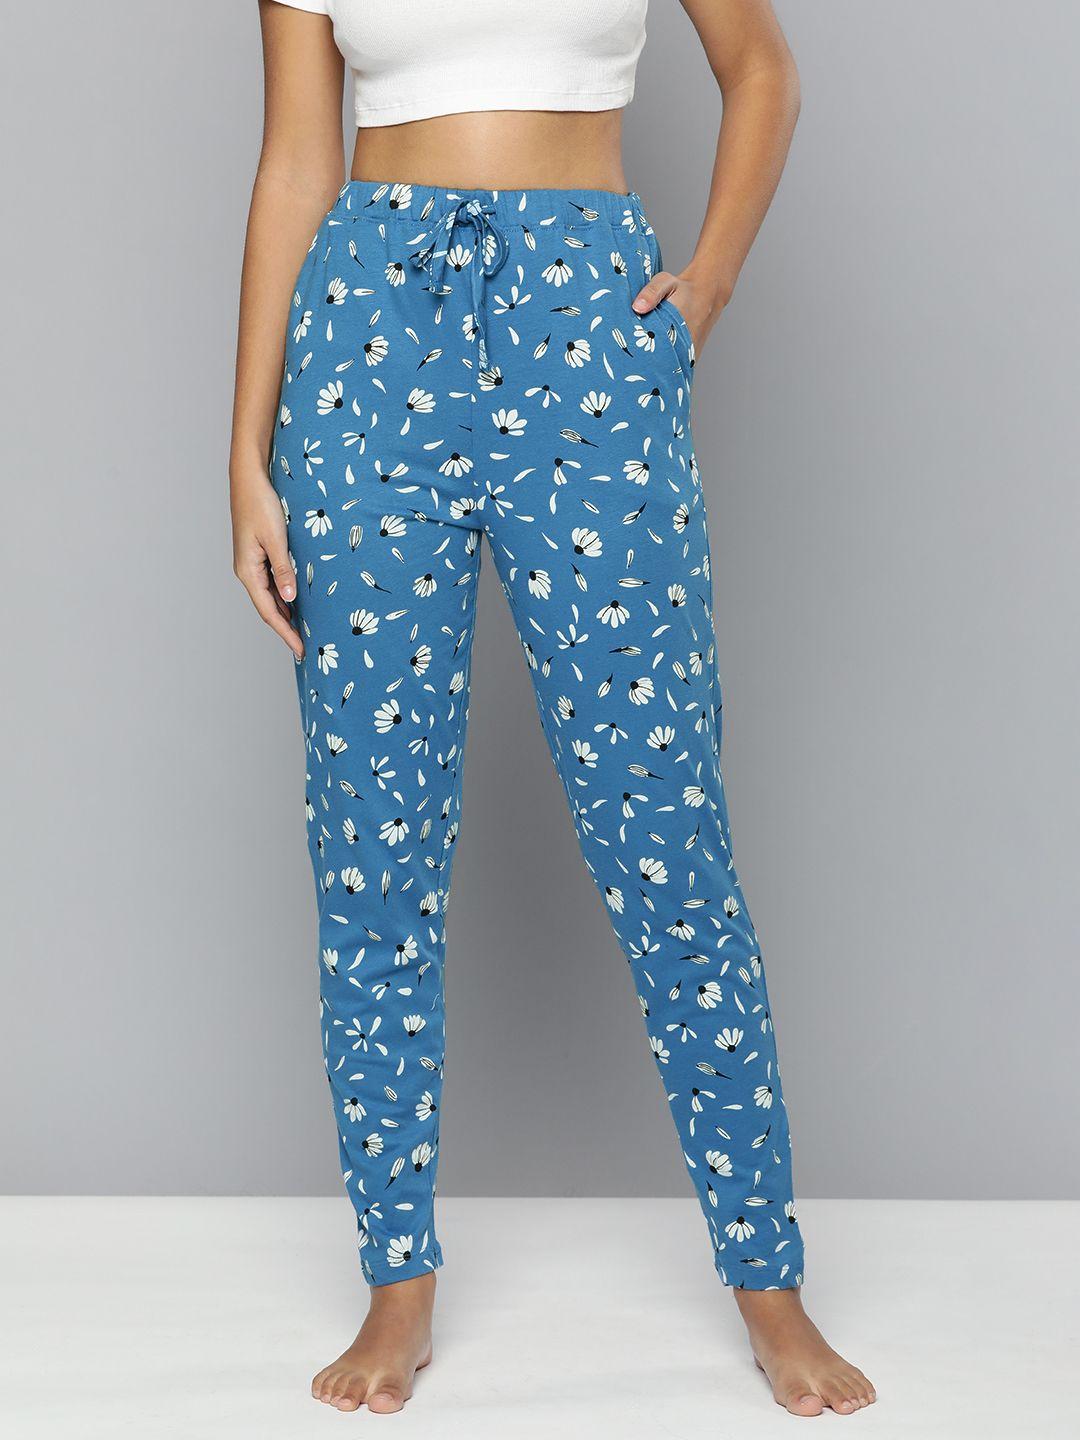 here&now women blue & white printed lounge pants